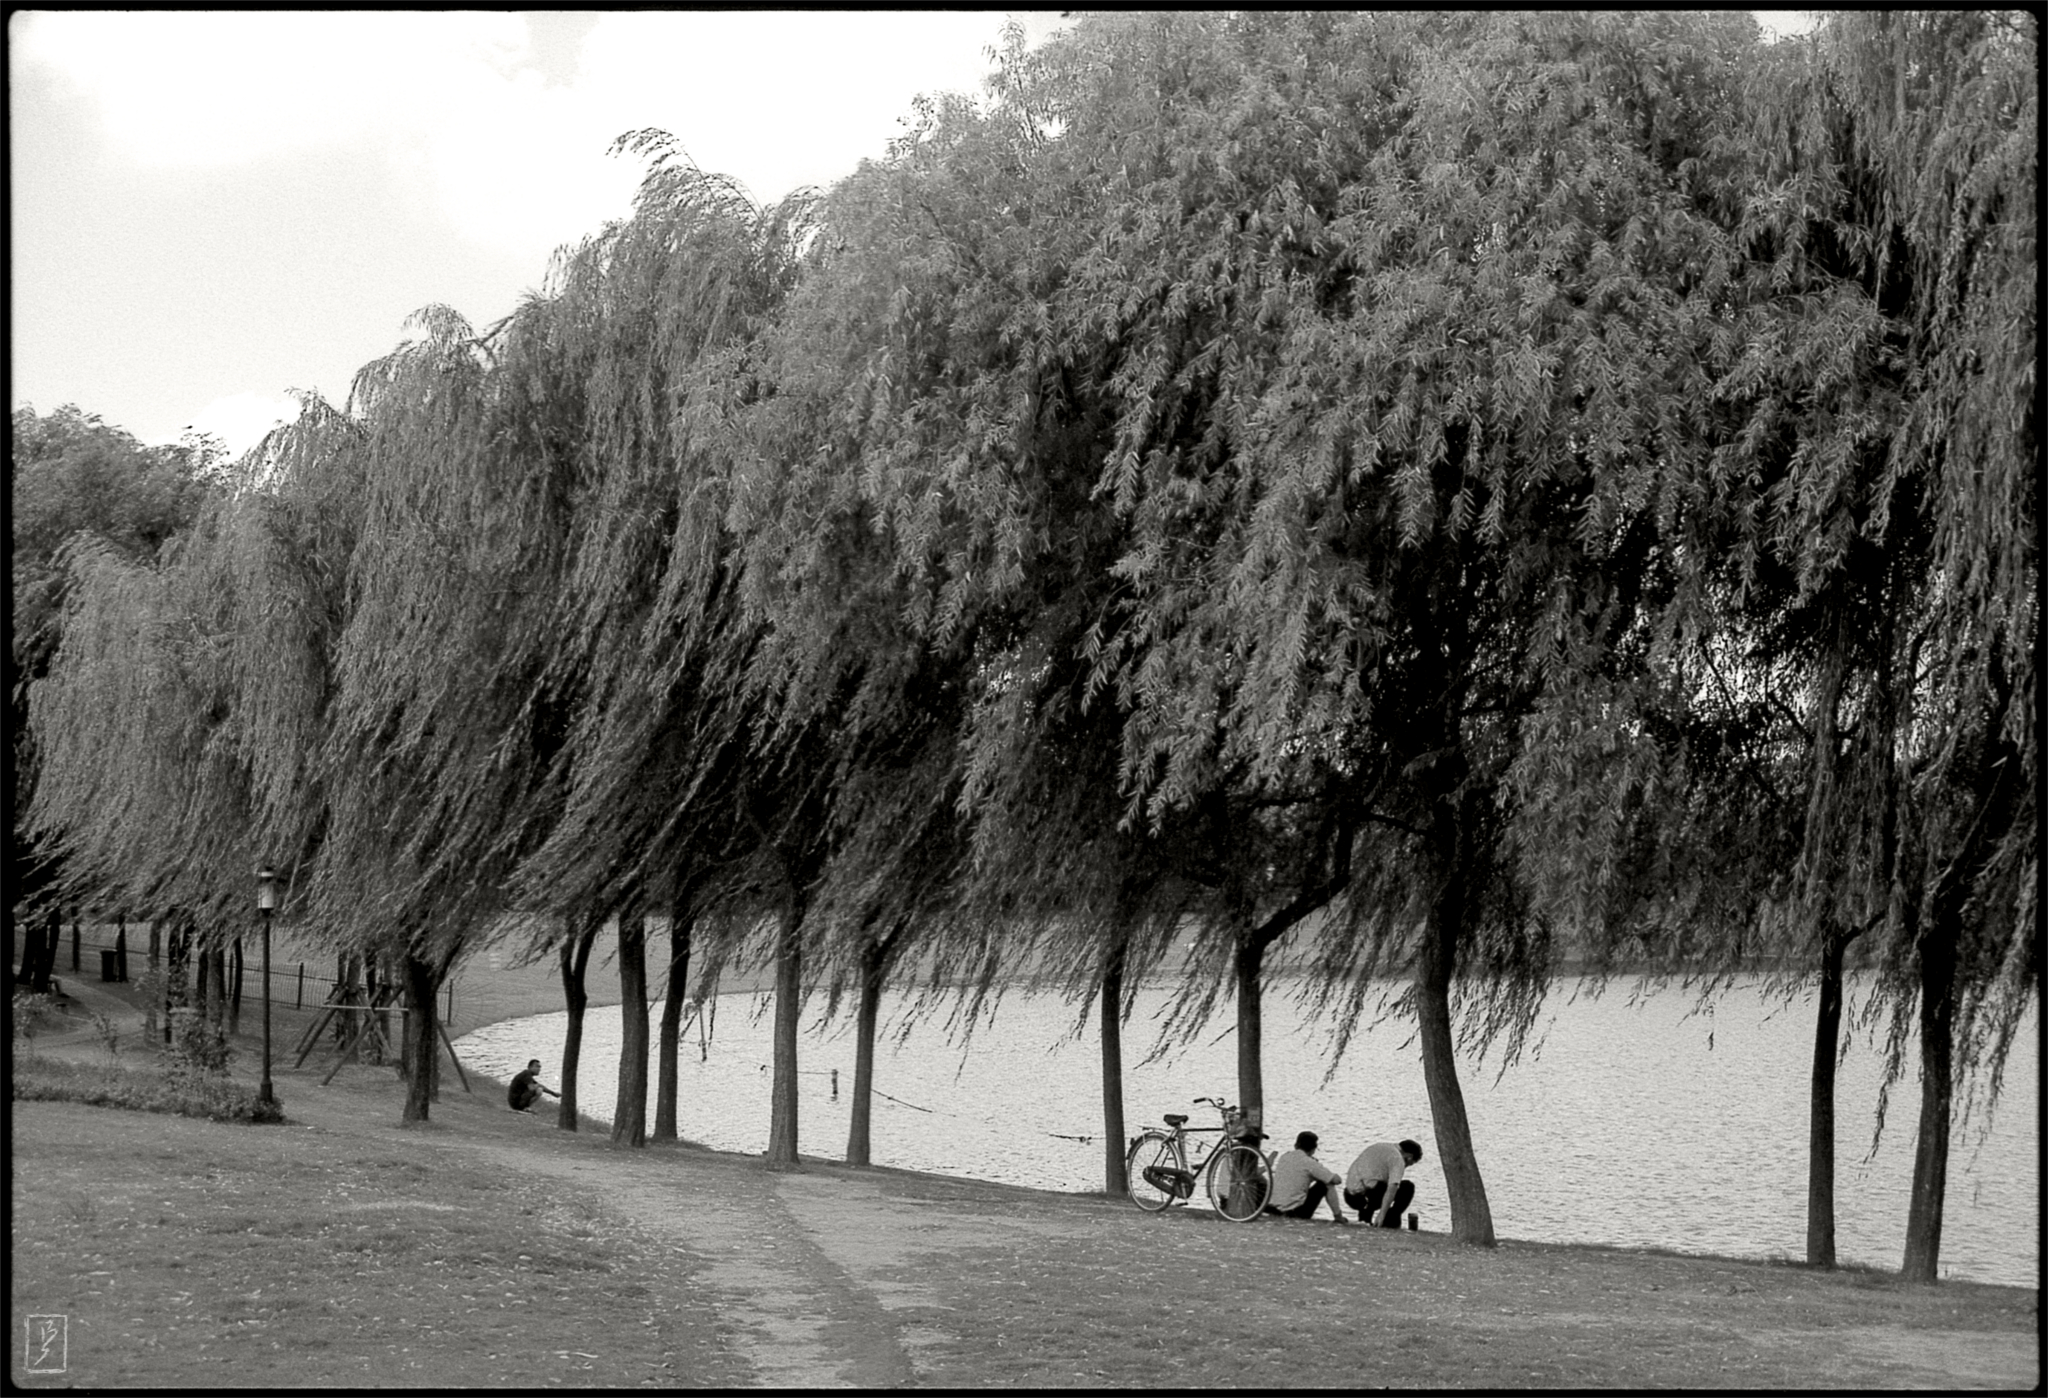 Huangxing park (黄兴公园): Having a break under the trees near the lake.